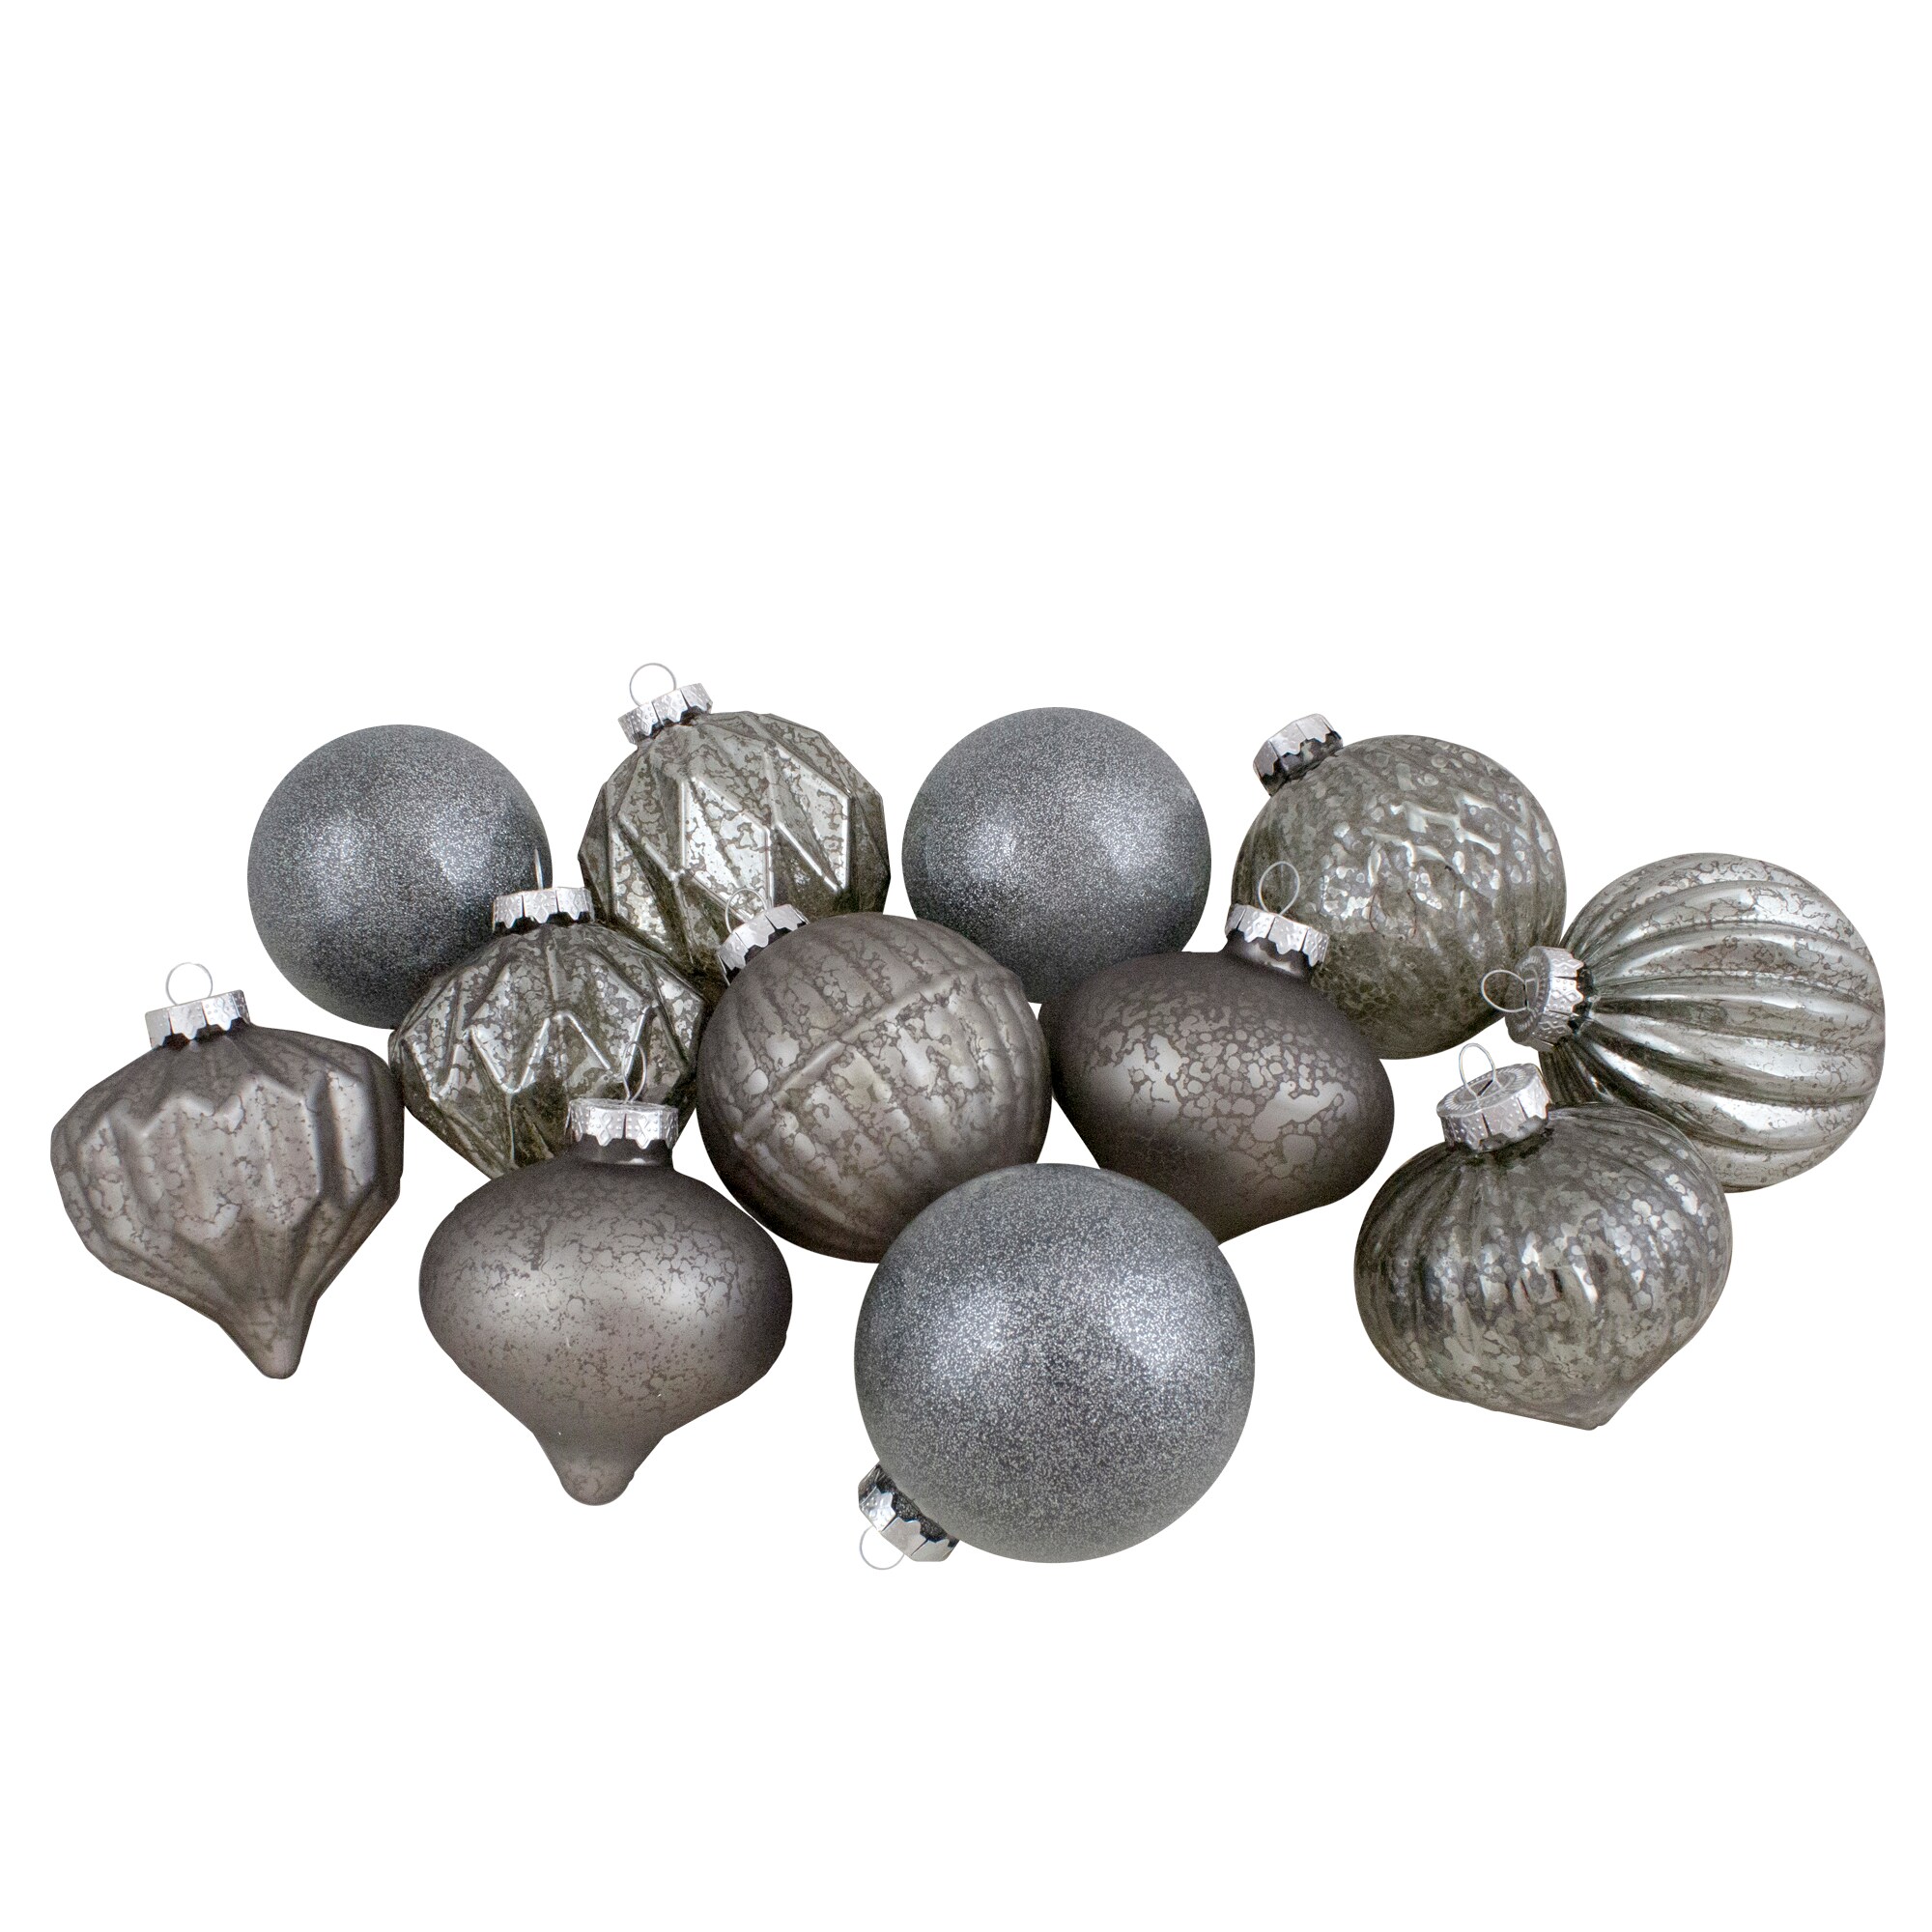 This Item Comes with 4 Ornaments per Unit. Vickerman 4.75 Clear Ball Christmas Ornament with Gunmetal Glitter Interior